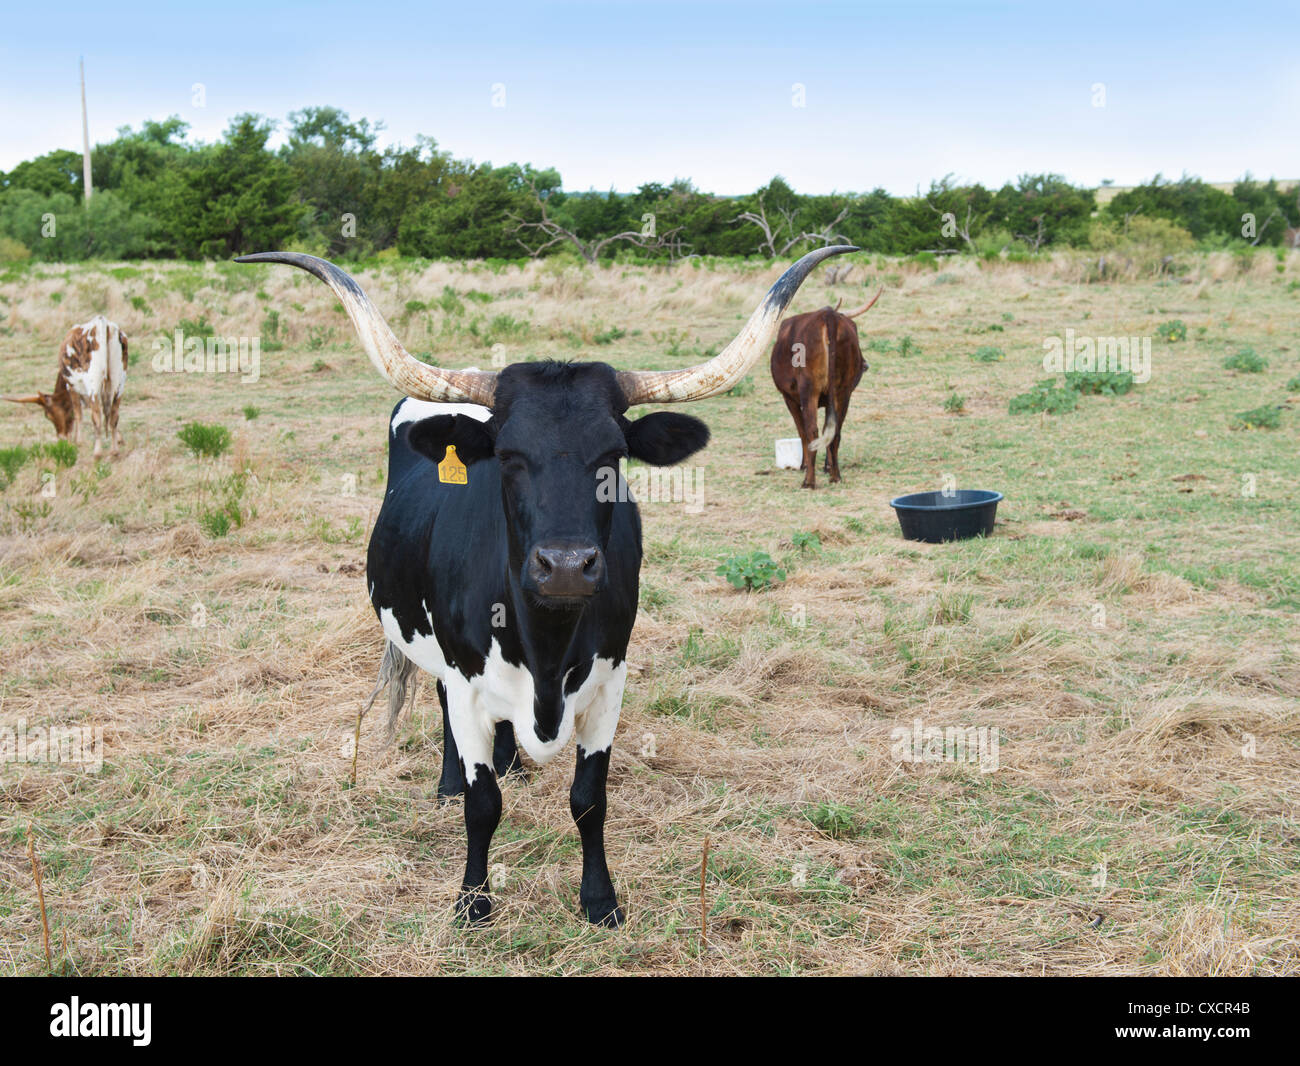 A  black and white Texas Longhorn, Bos bos, stands in a pasture looking at camera with two other cattle in background. Oklahoma, USA. Stock Photo